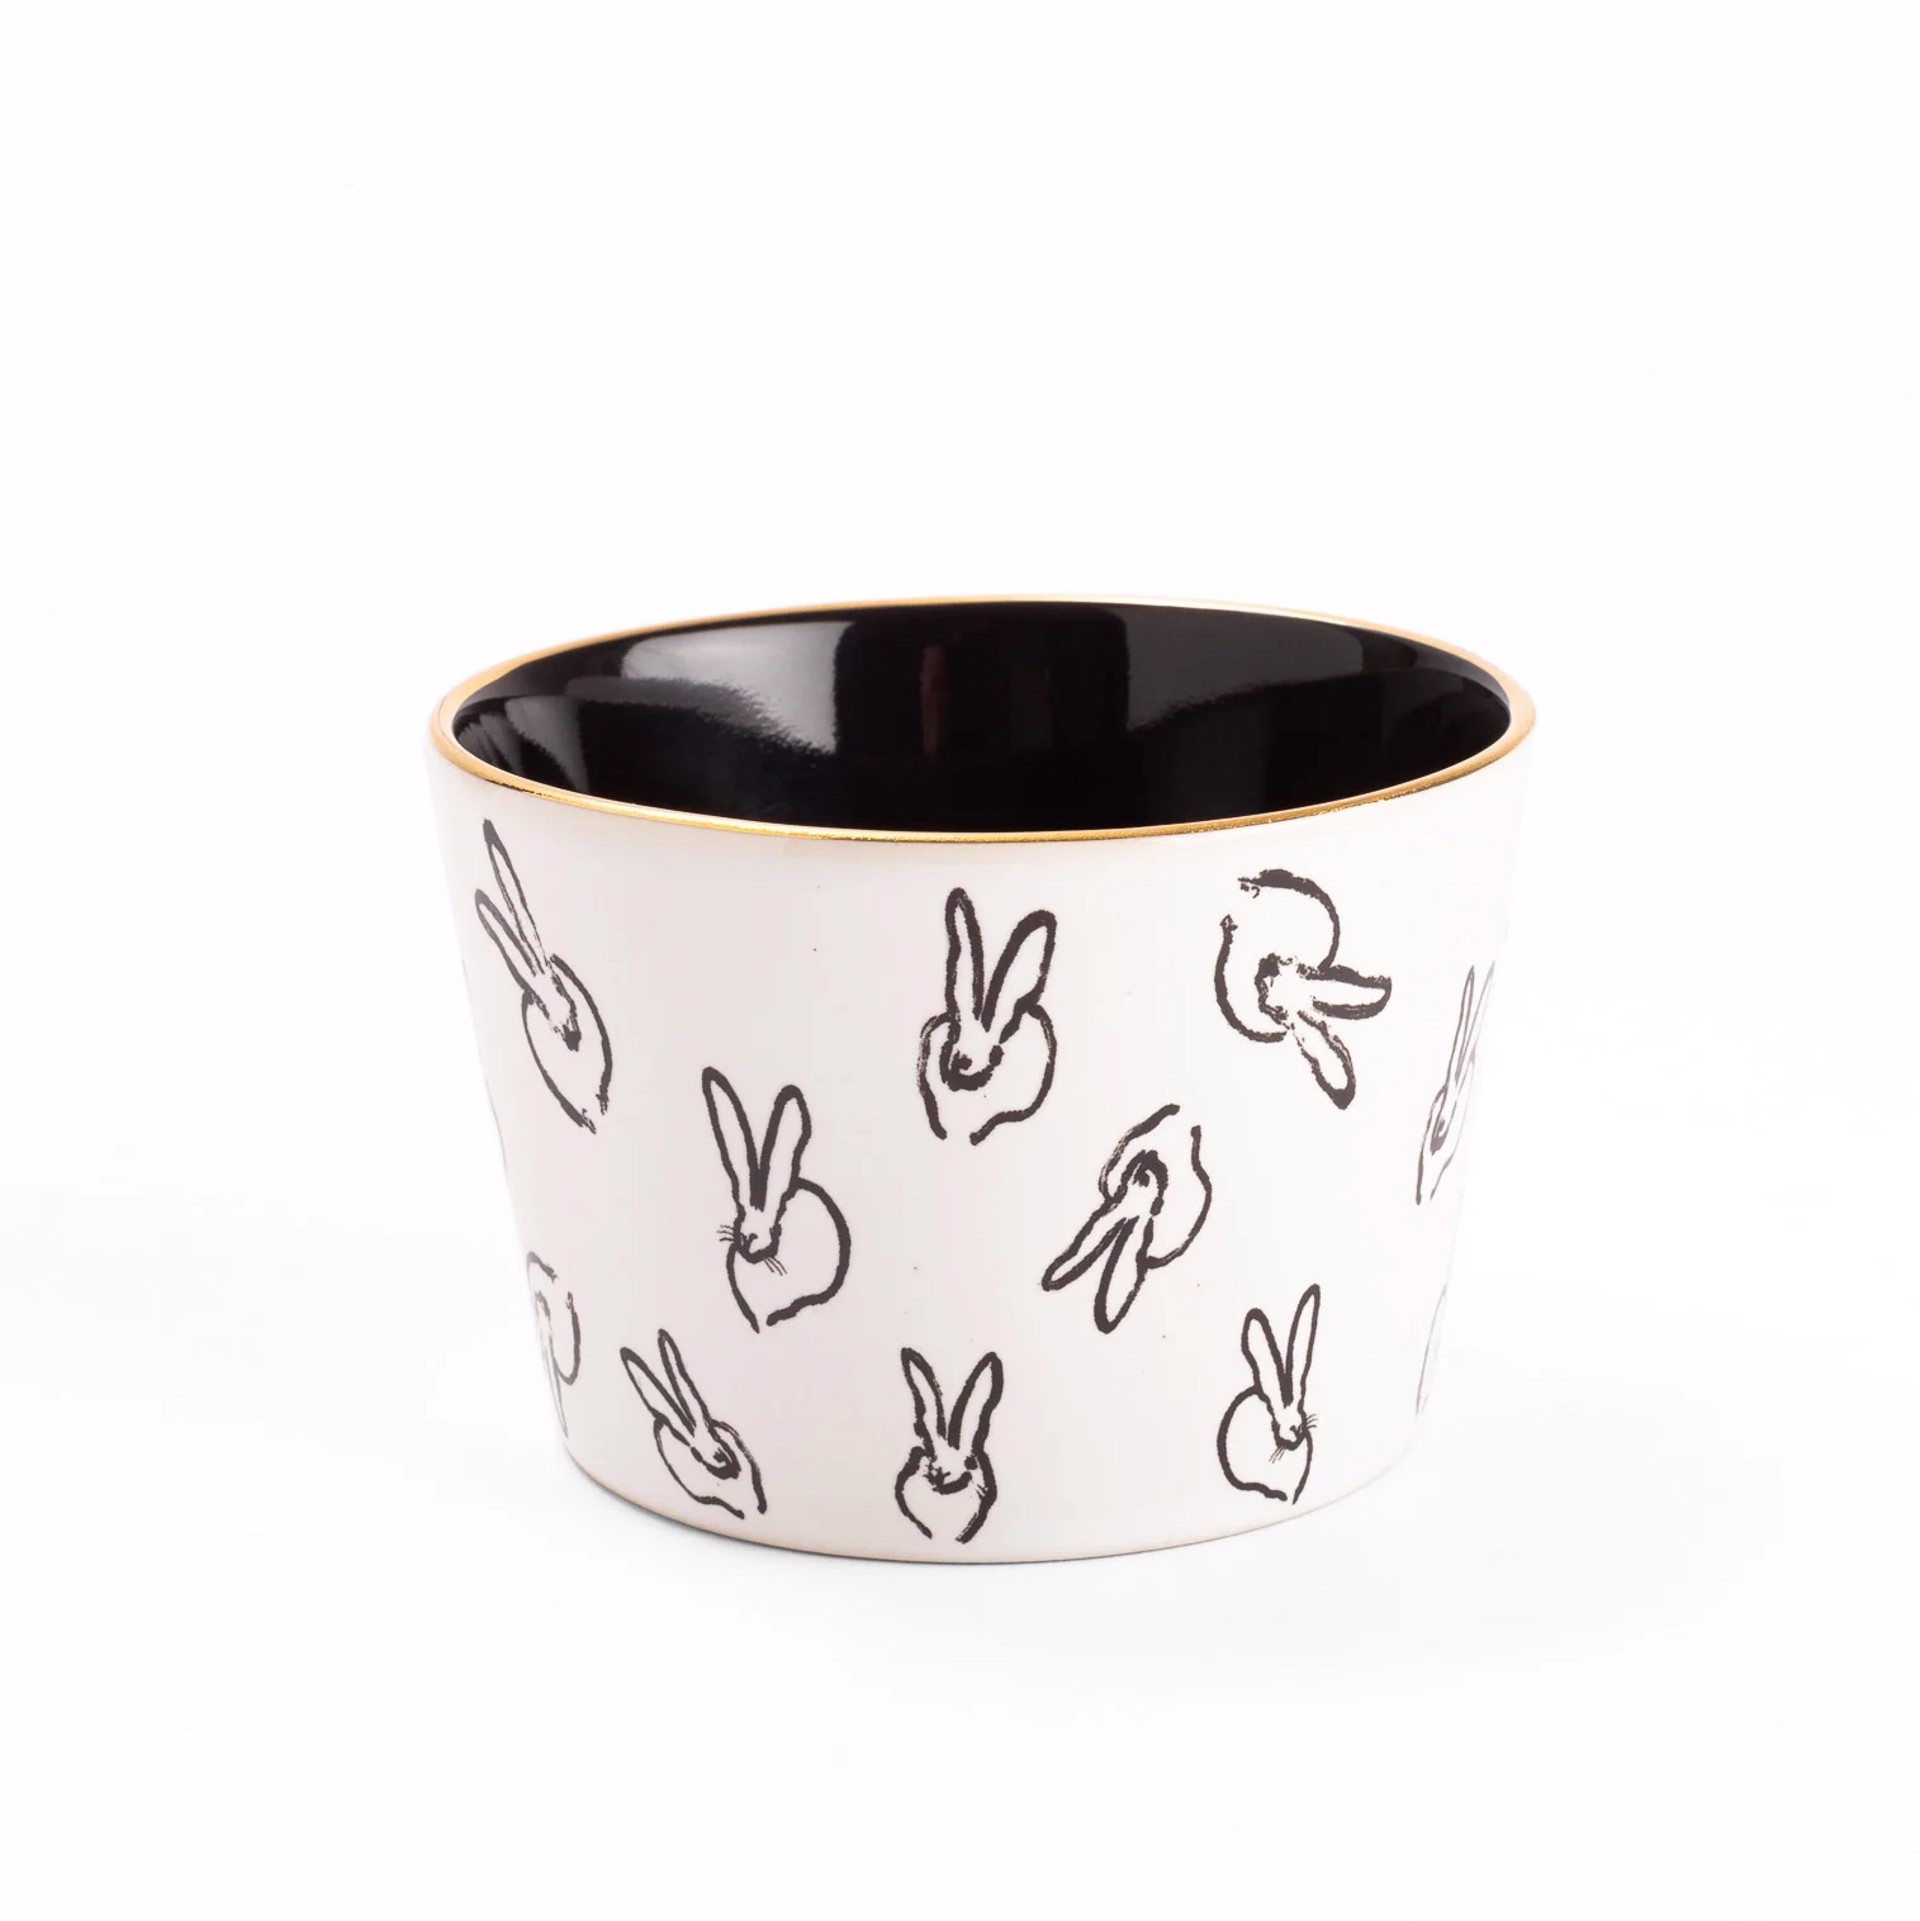 Bunny Bar Bowl - With Hand Painted Gold Rim by Hunt Slonem (Hop Up Shop)